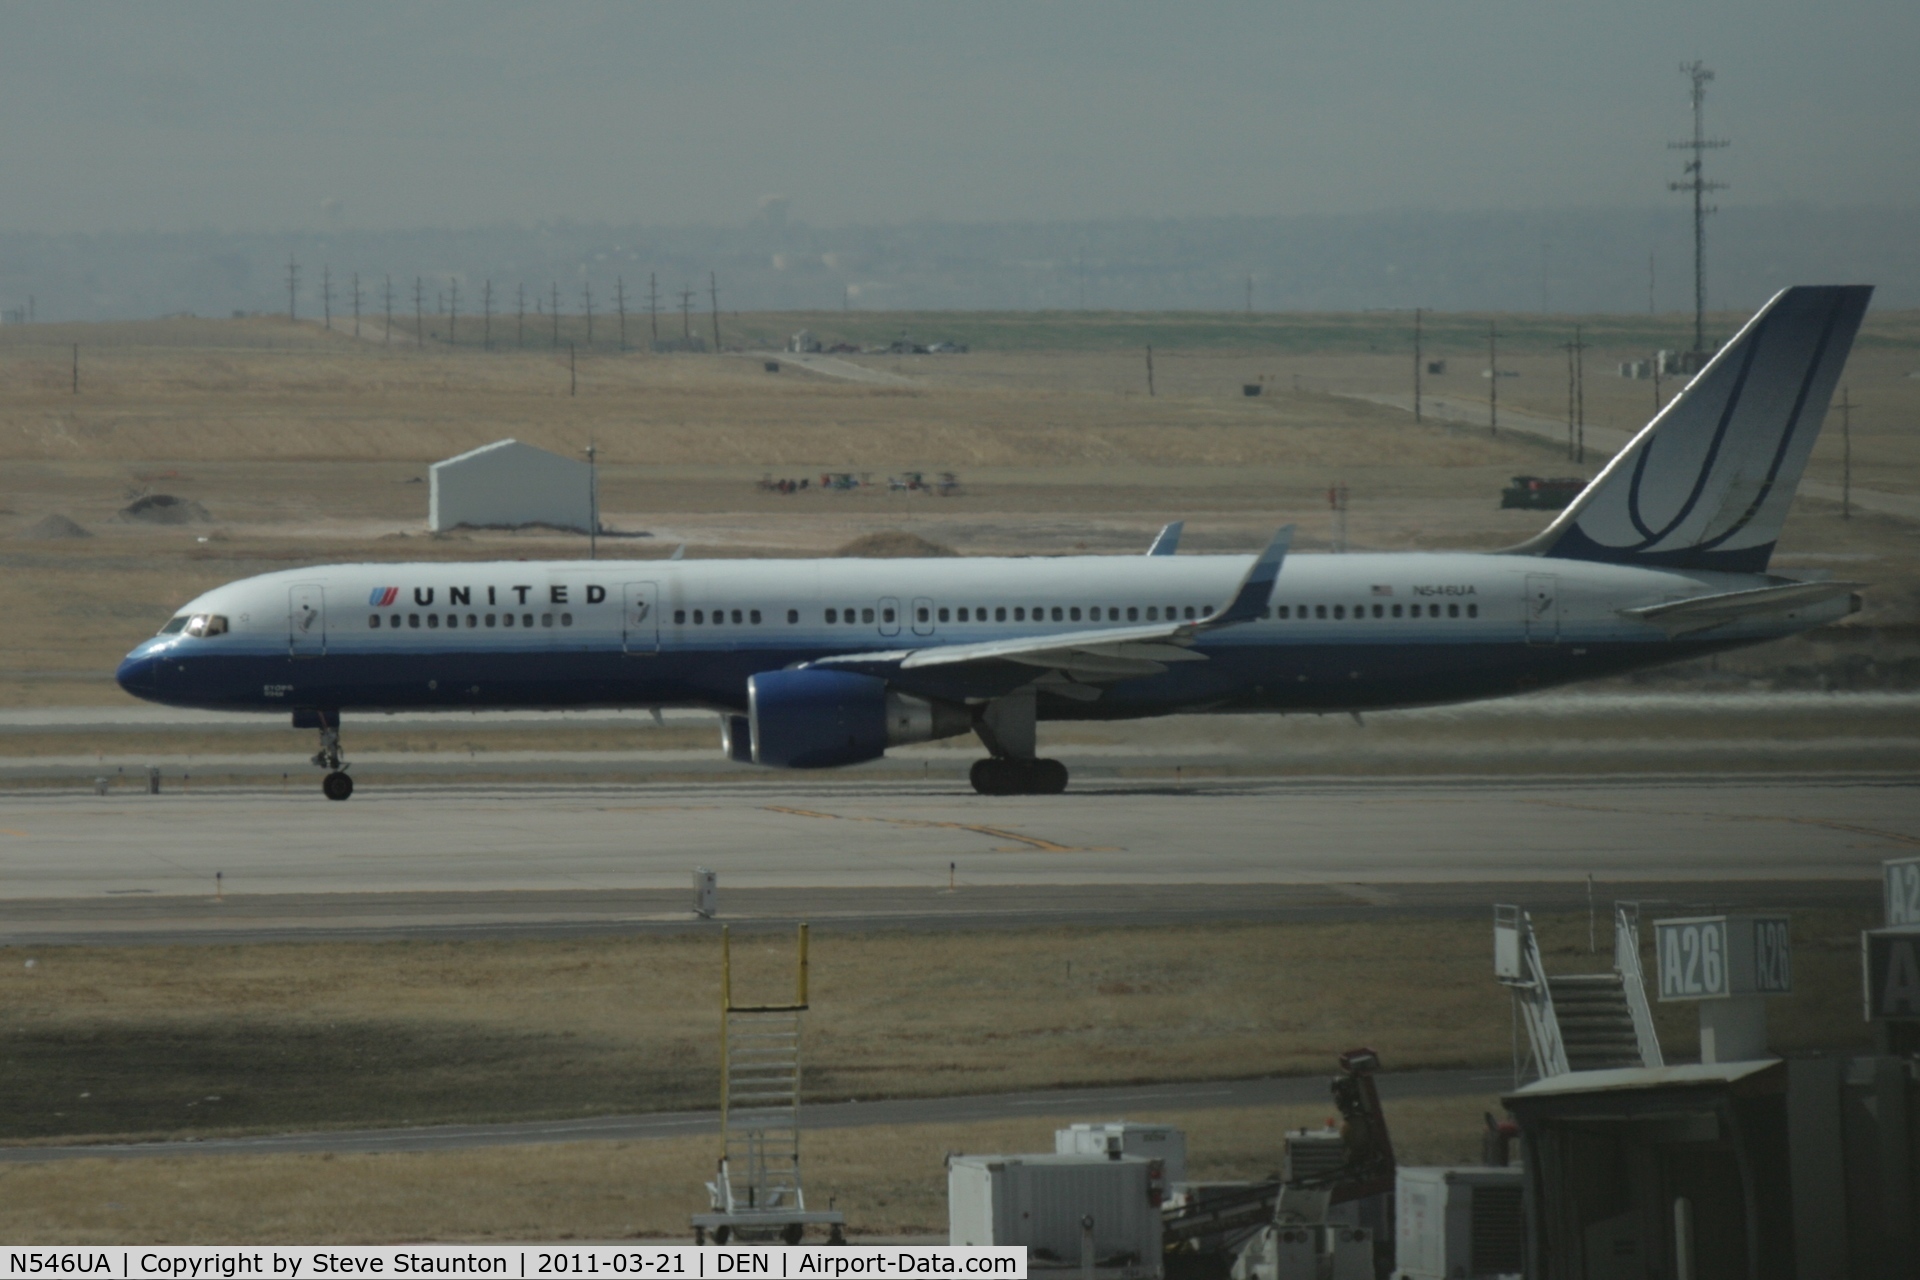 N546UA, 1991 Boeing 757-222 C/N 25367, Taken at Denver International Airport, in March 2011 whilst on an Aeroprint Aviation tour